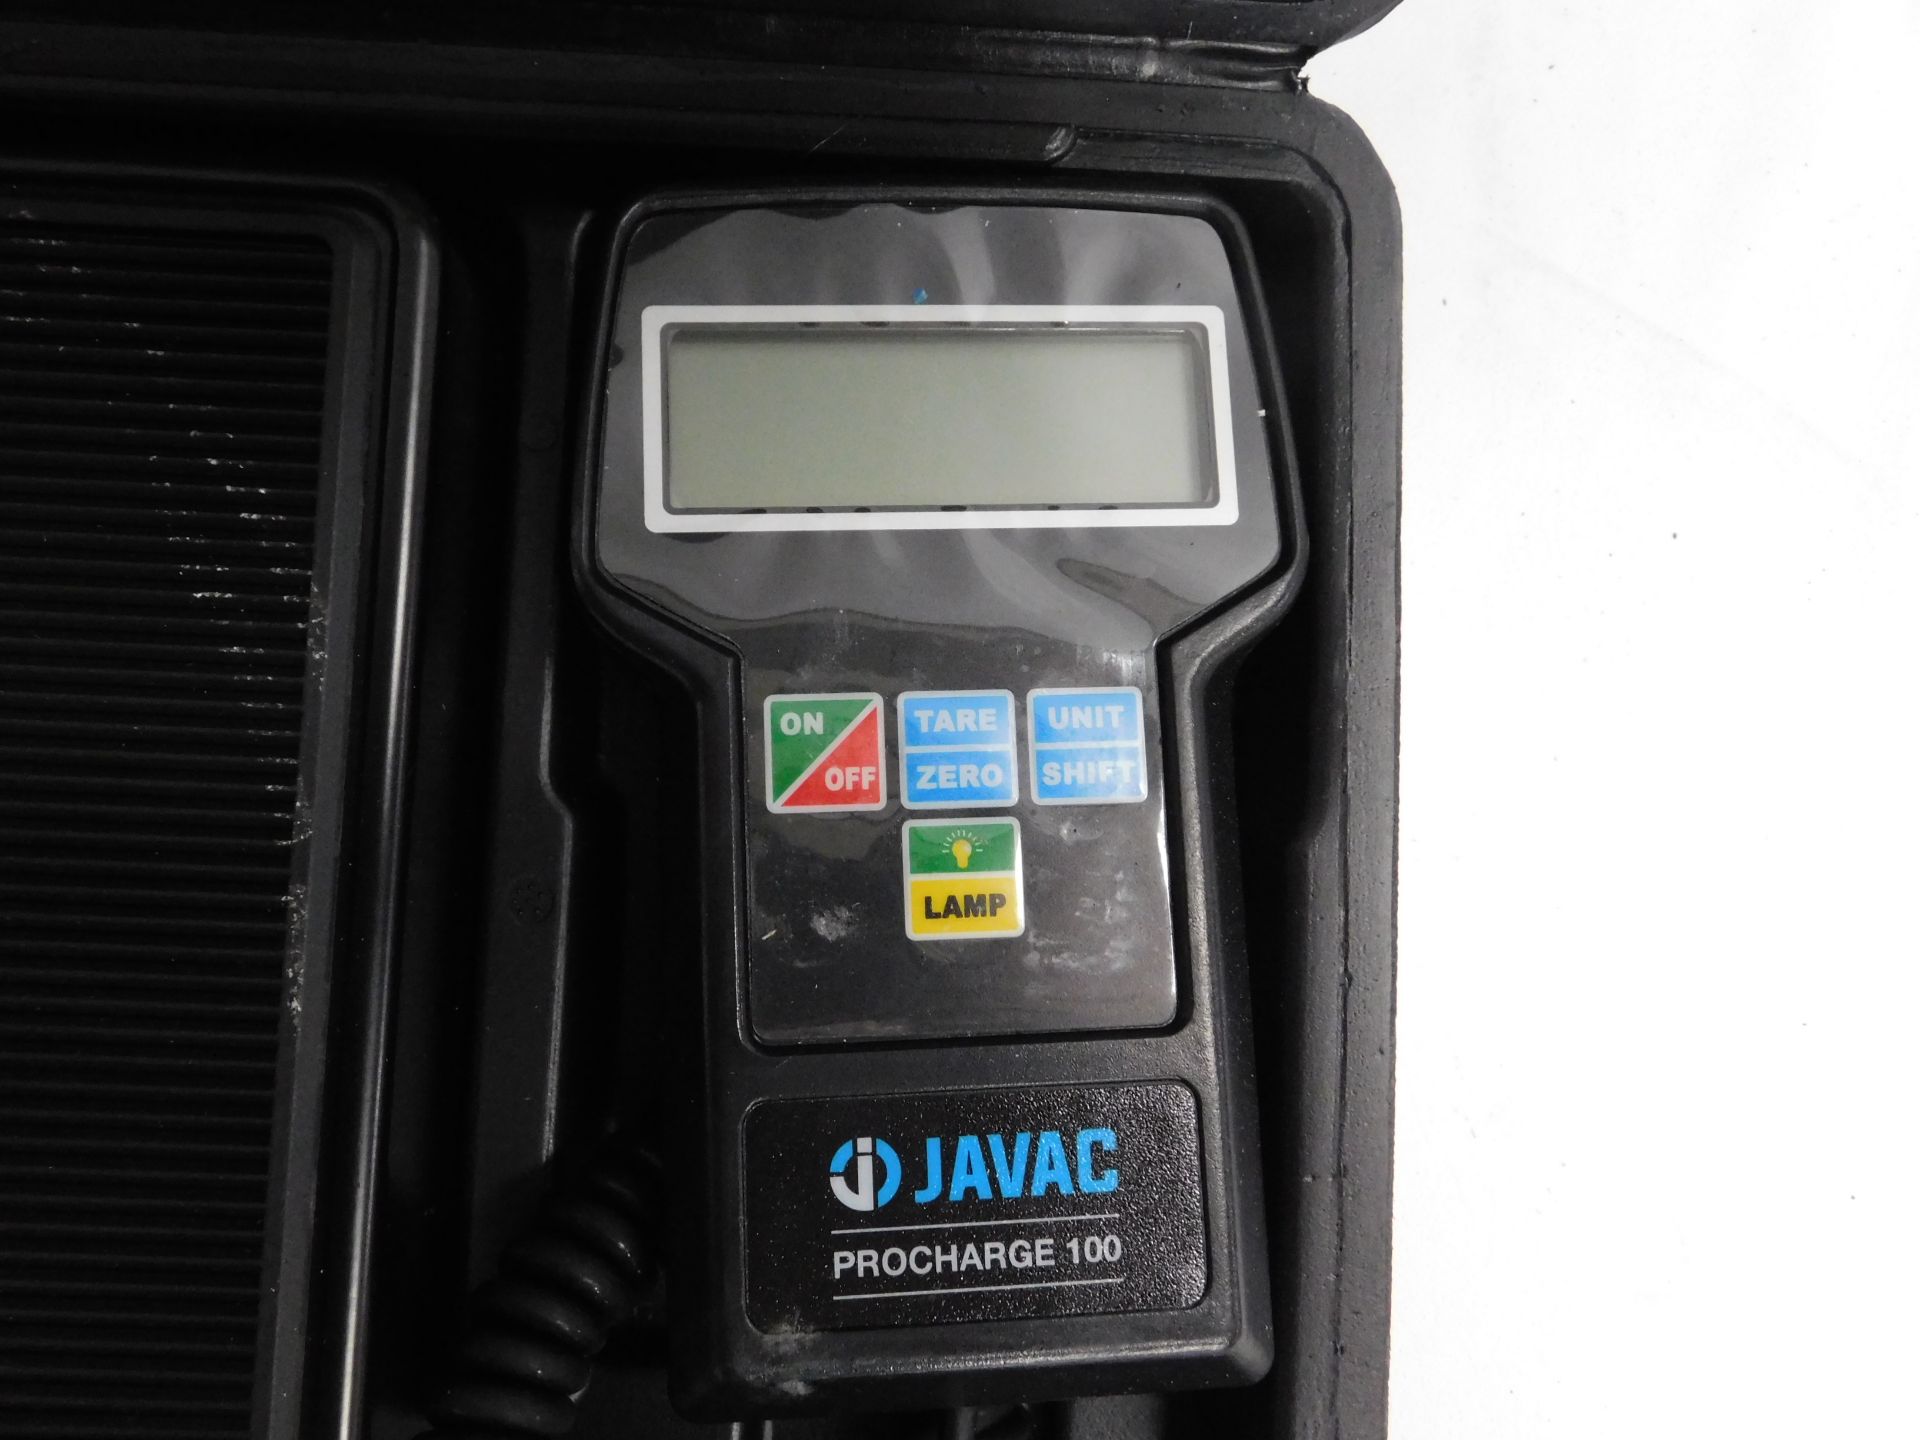 JAVAC Procharge G58610 100 Charging Scales (Location Brentwood. Please Refer to General Notes) - Image 3 of 5